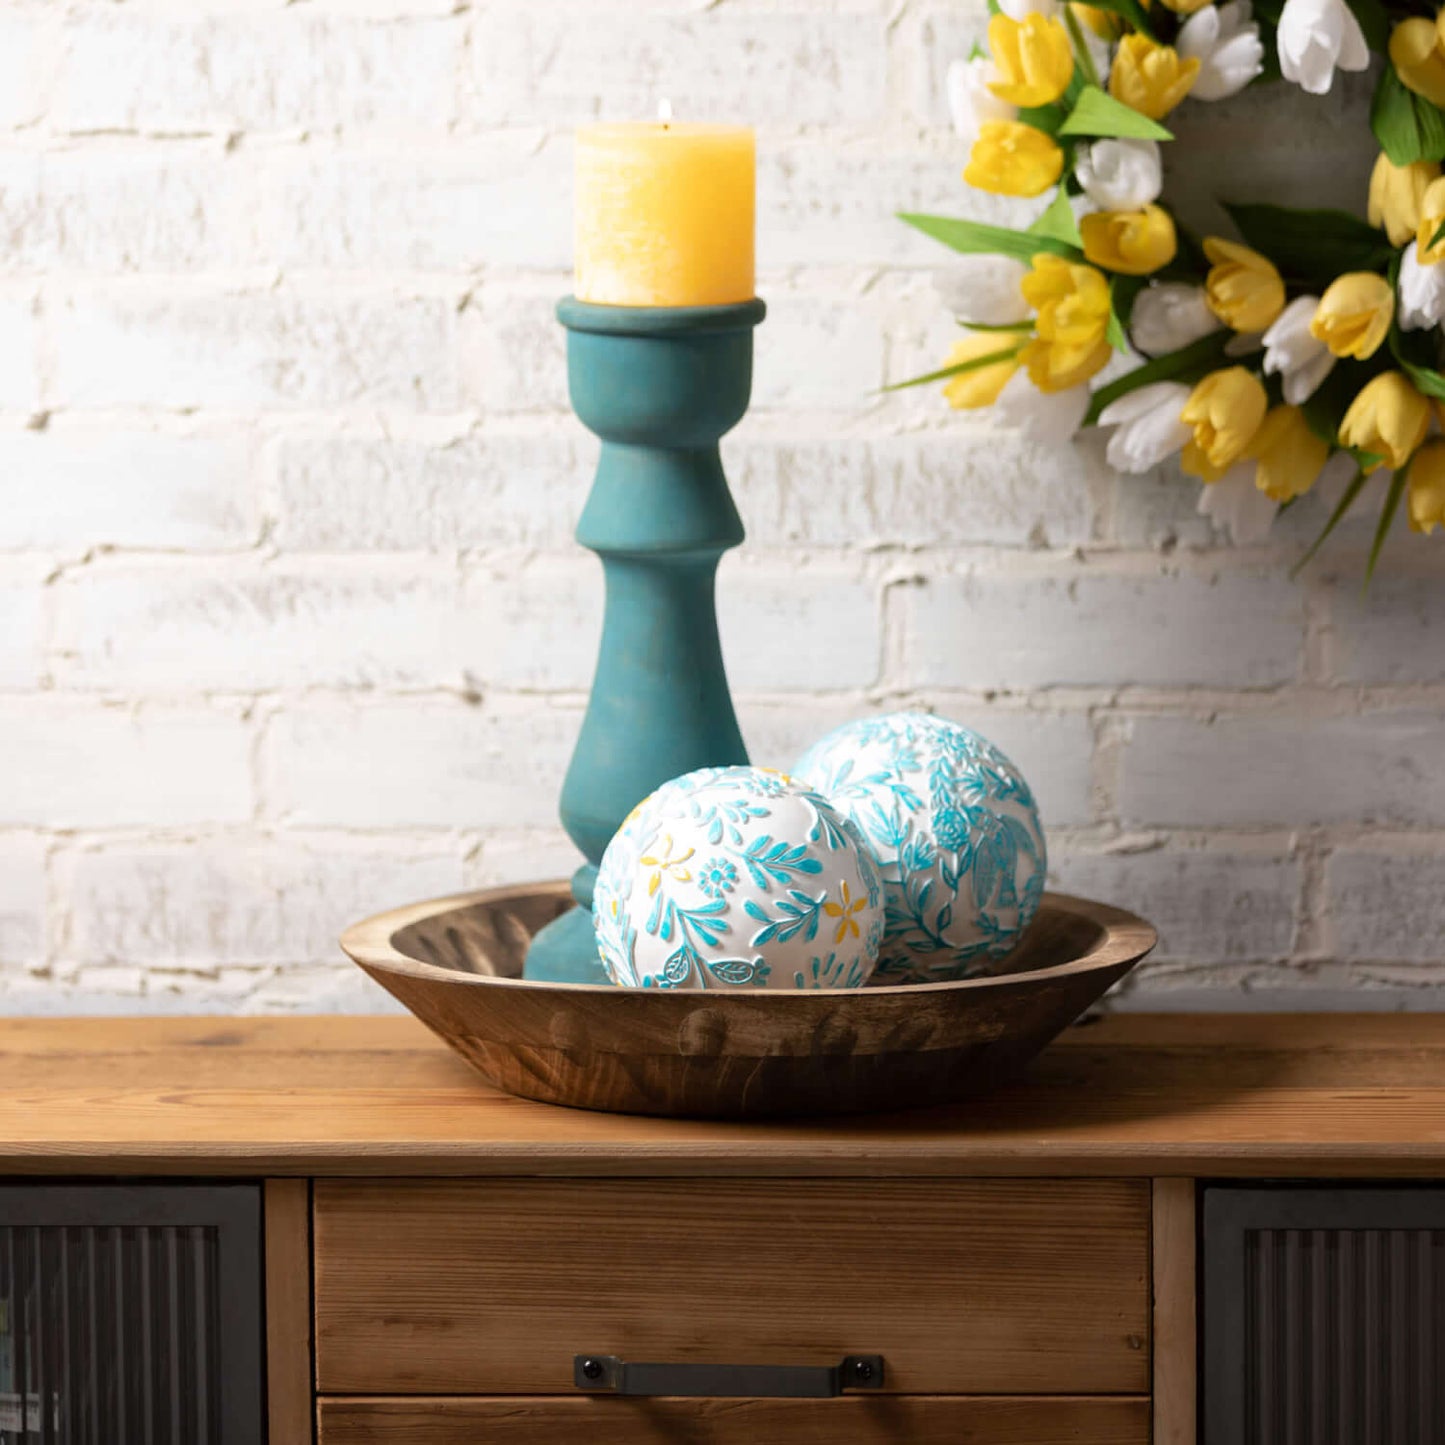 candle stick with yellow candle on it set in a wooden bowl with 2 decorative orbs.